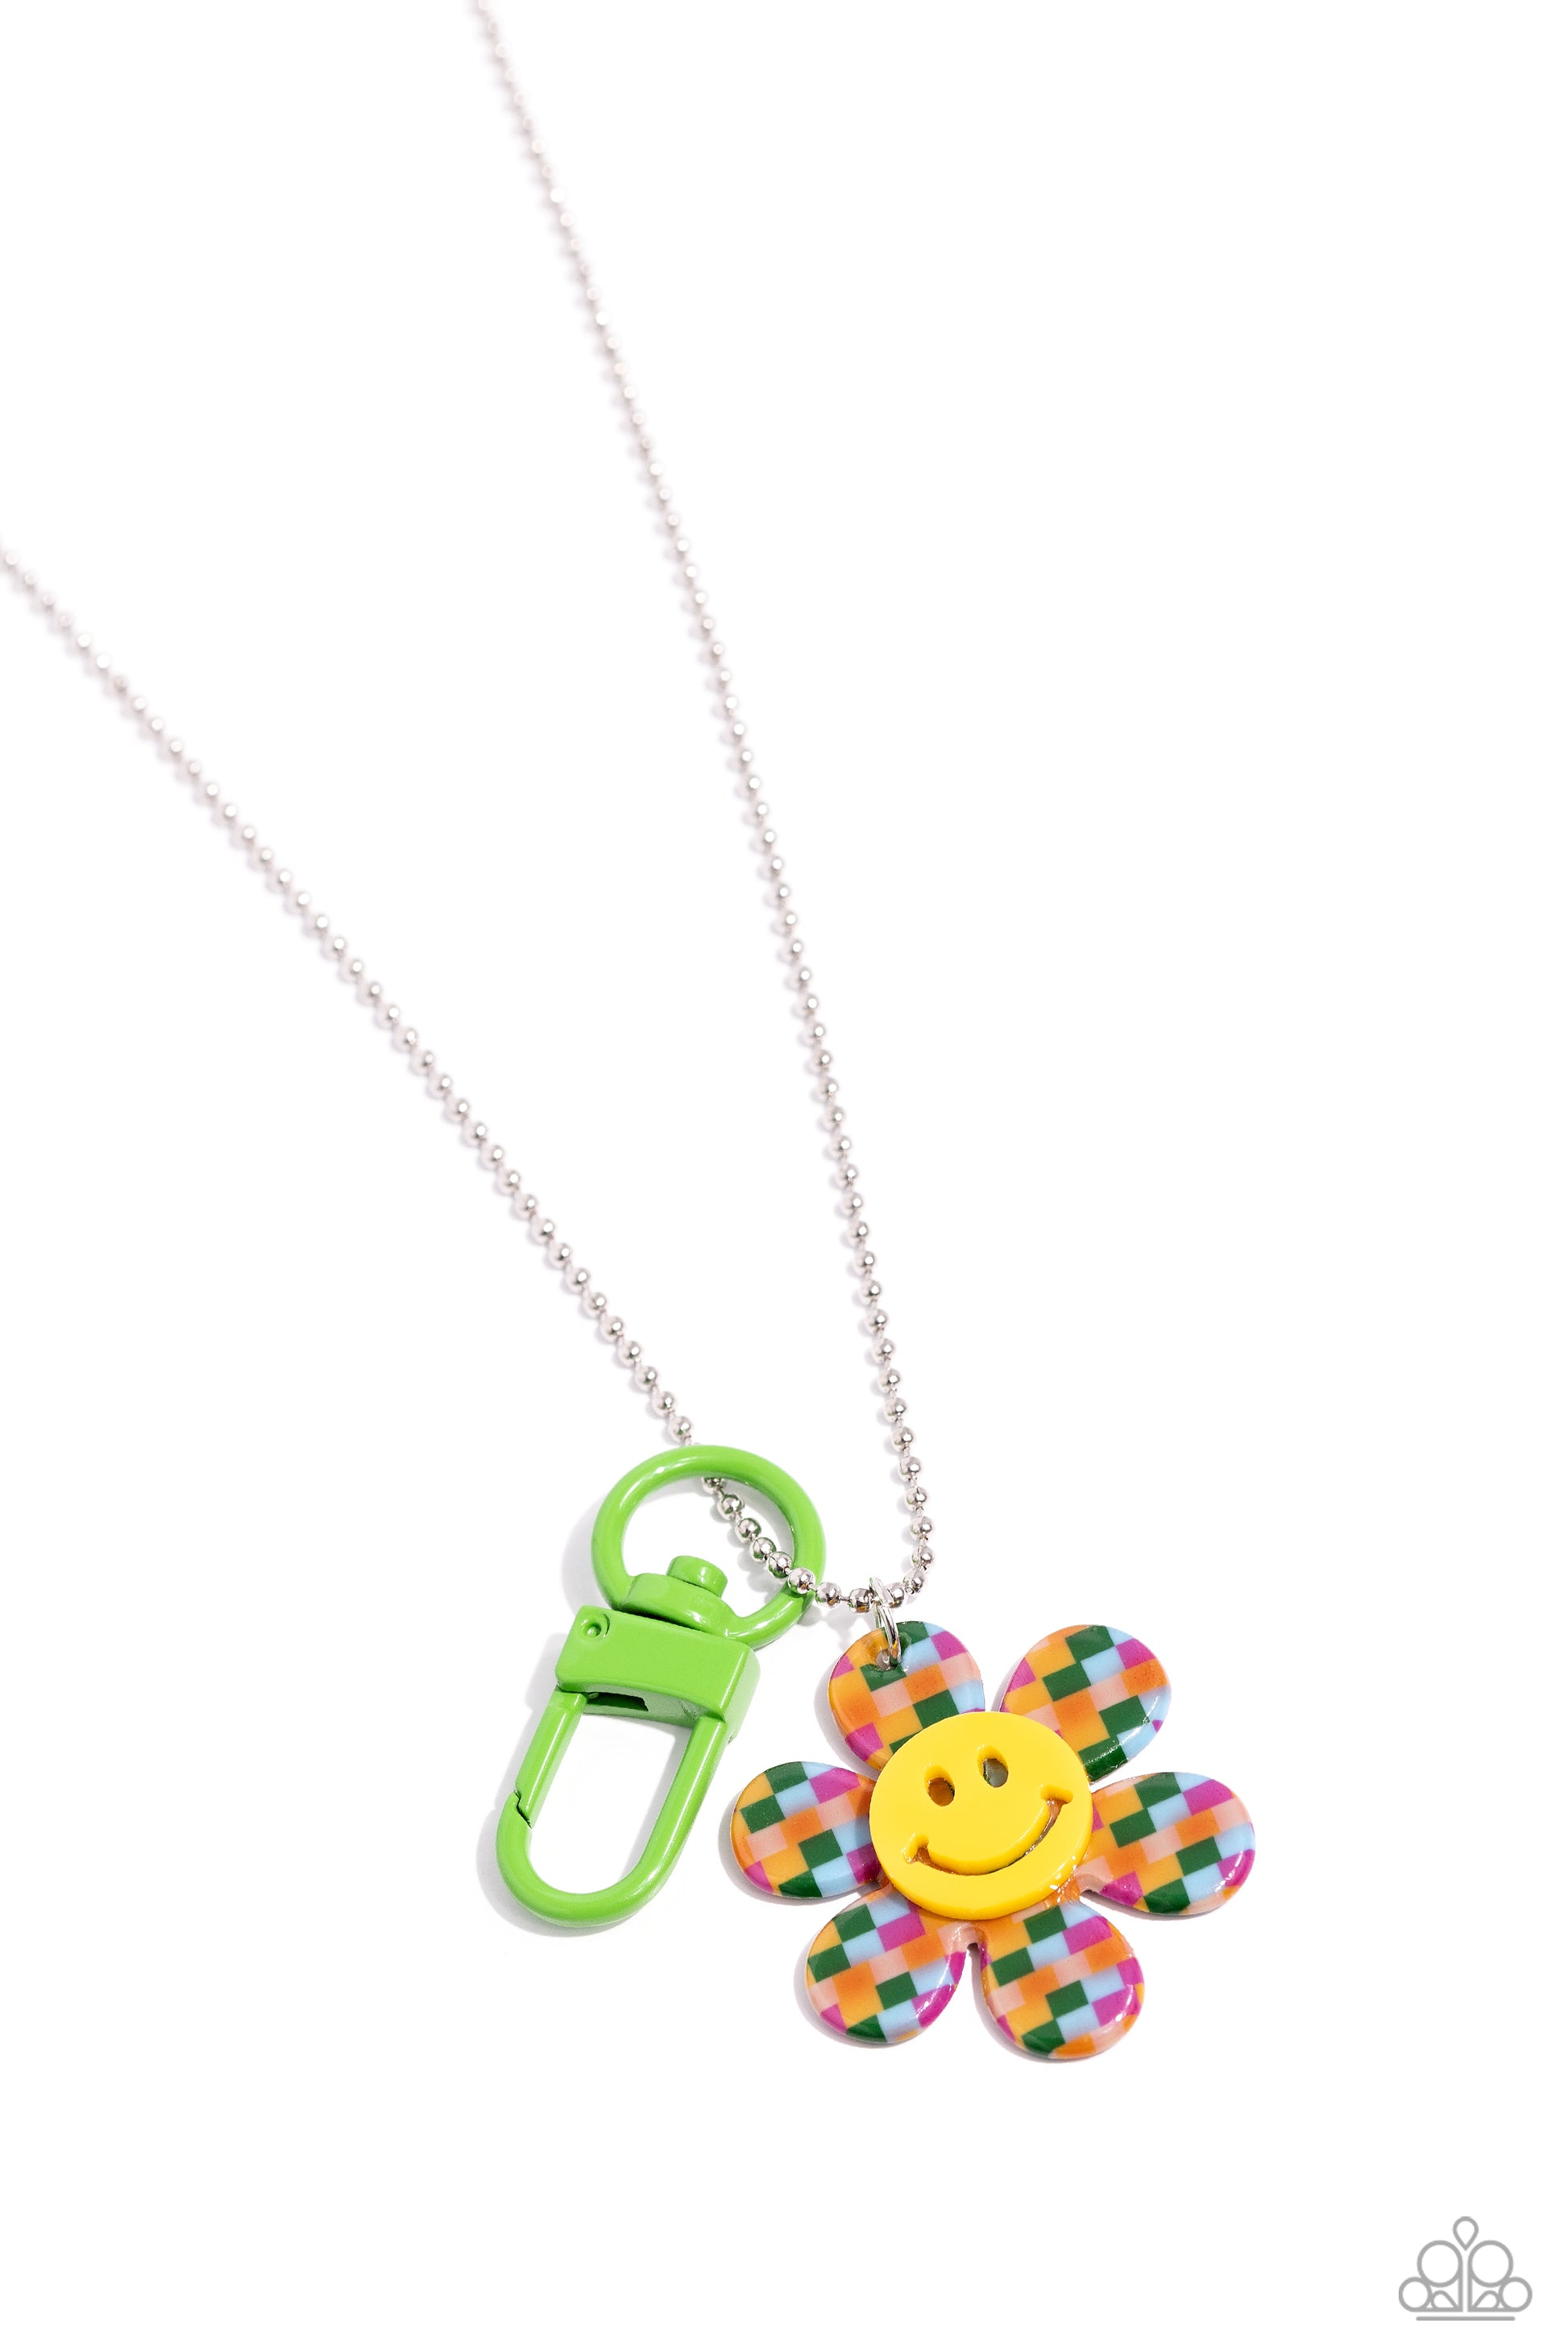 Take A HOOK At Me Now Multi Smiley Face Lanyard - Paparazzi Accessories  Radiating with a multicolored checkerboard pattern, a yellow smiley face floral frame swings next to a Classic Green lanyard hook from an elongated silver ball chain, creating an optimistic-inspired statement below the collar. A lobster clasp hangs from the bottom of the design to allow a name badge or other item to be attached. Features an adjustable clasp closure.